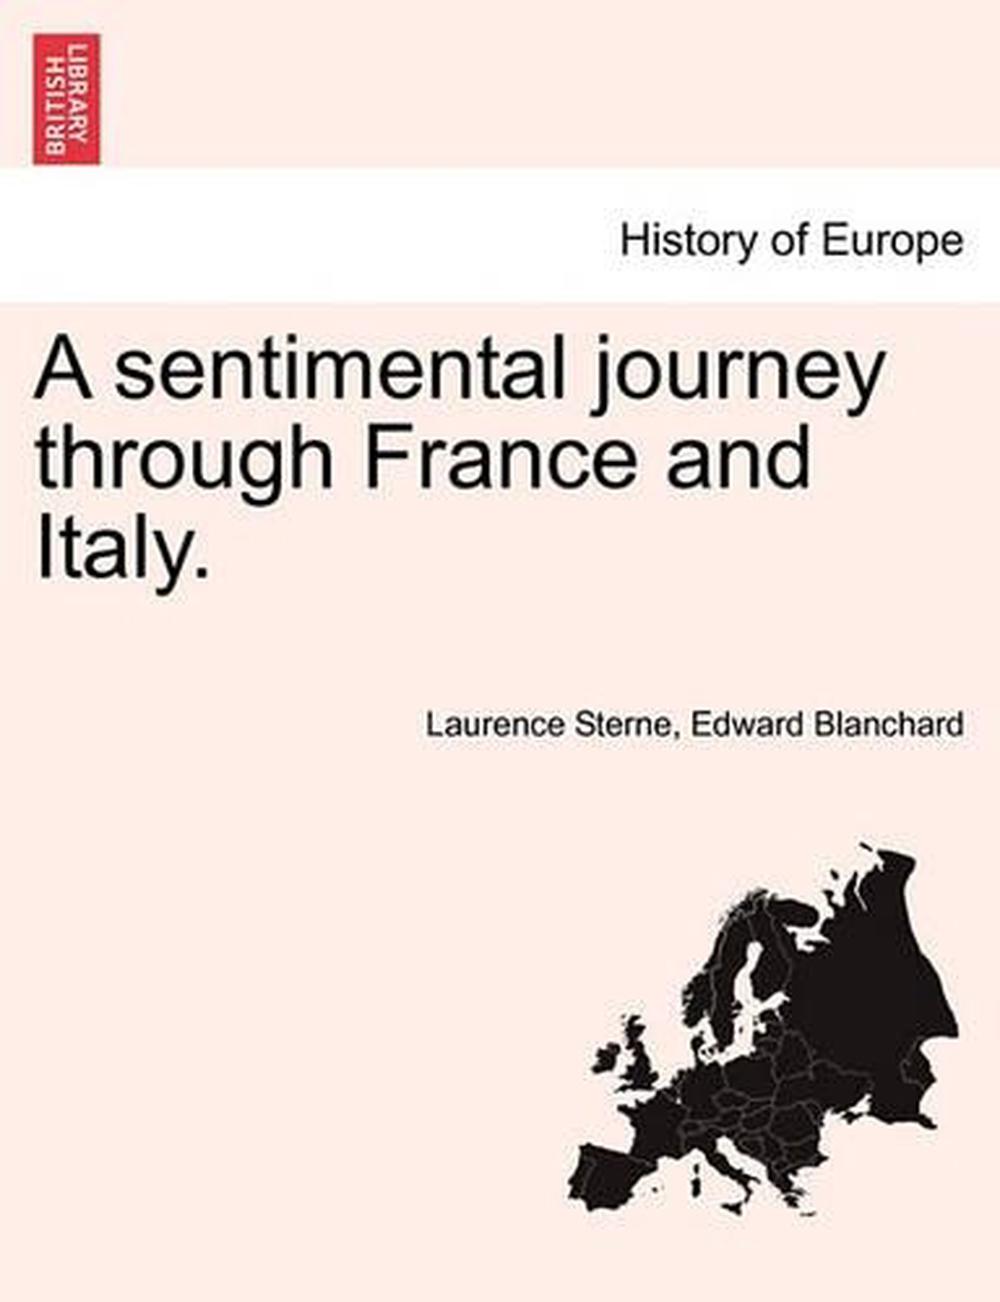 A Sentimental Journey through France and Italy by Laurence Sterne